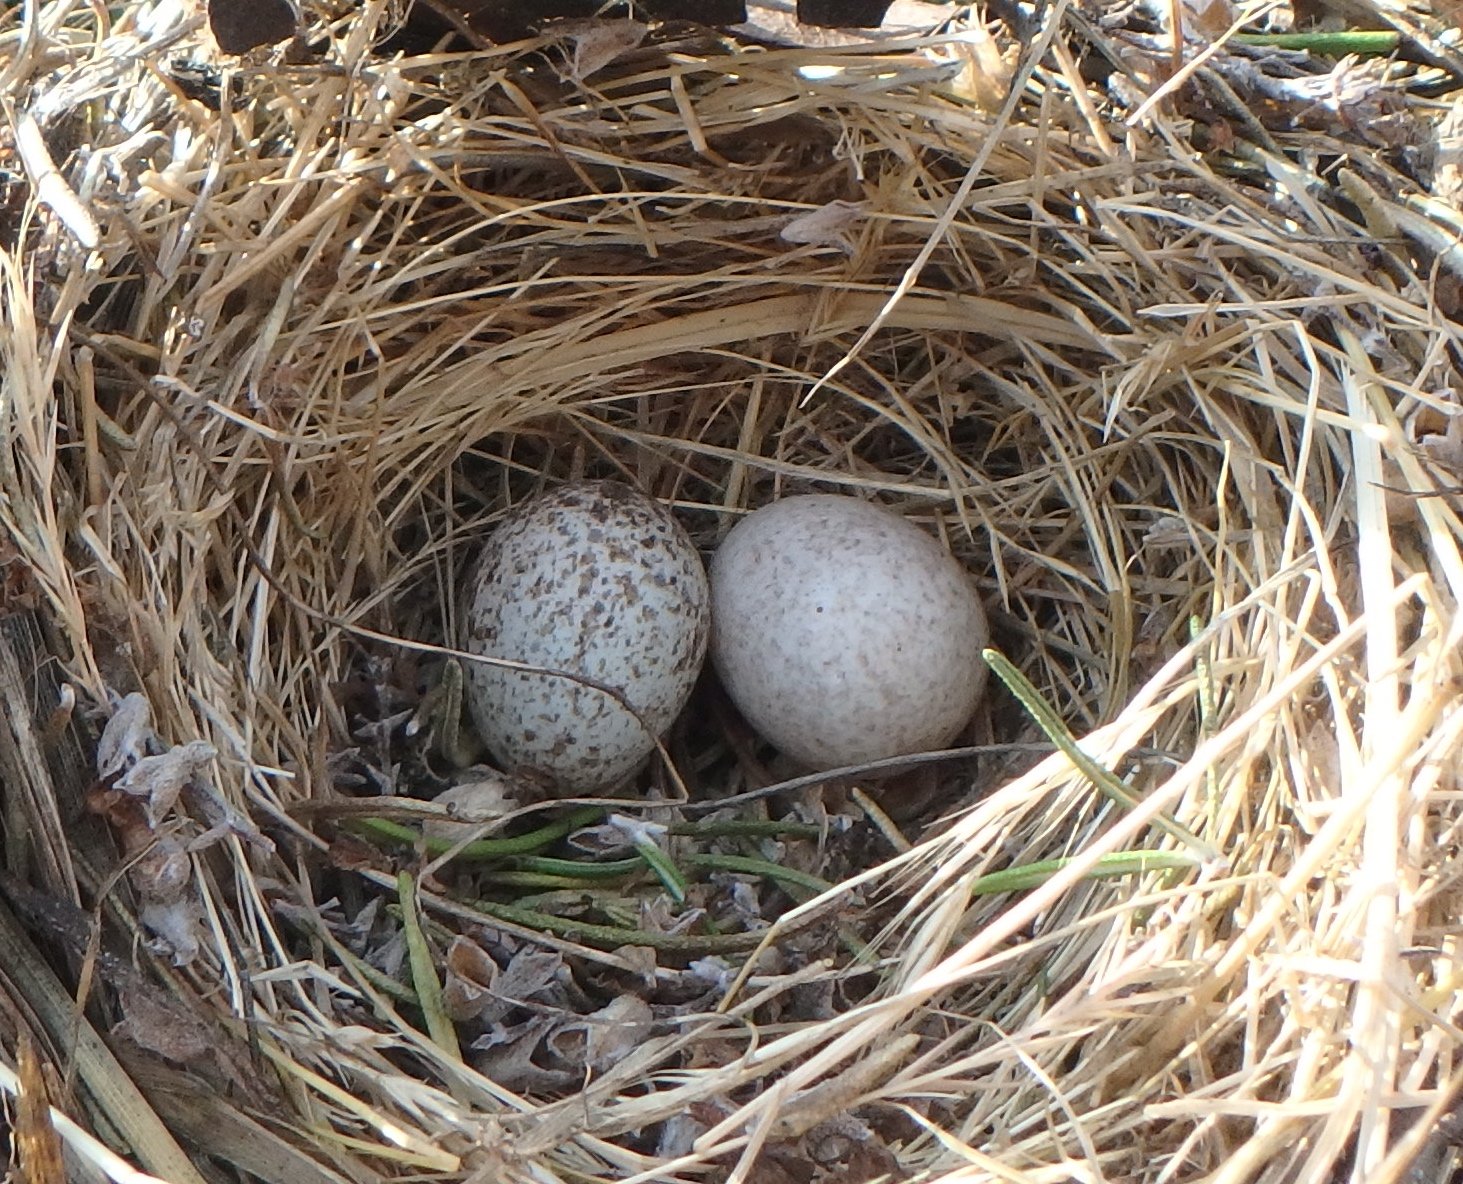 Unhatched eggs in this abandoned songbird nest suggest the parent birds felt threatened by predators, which can include crows, domestic cats, rats, and even humans.